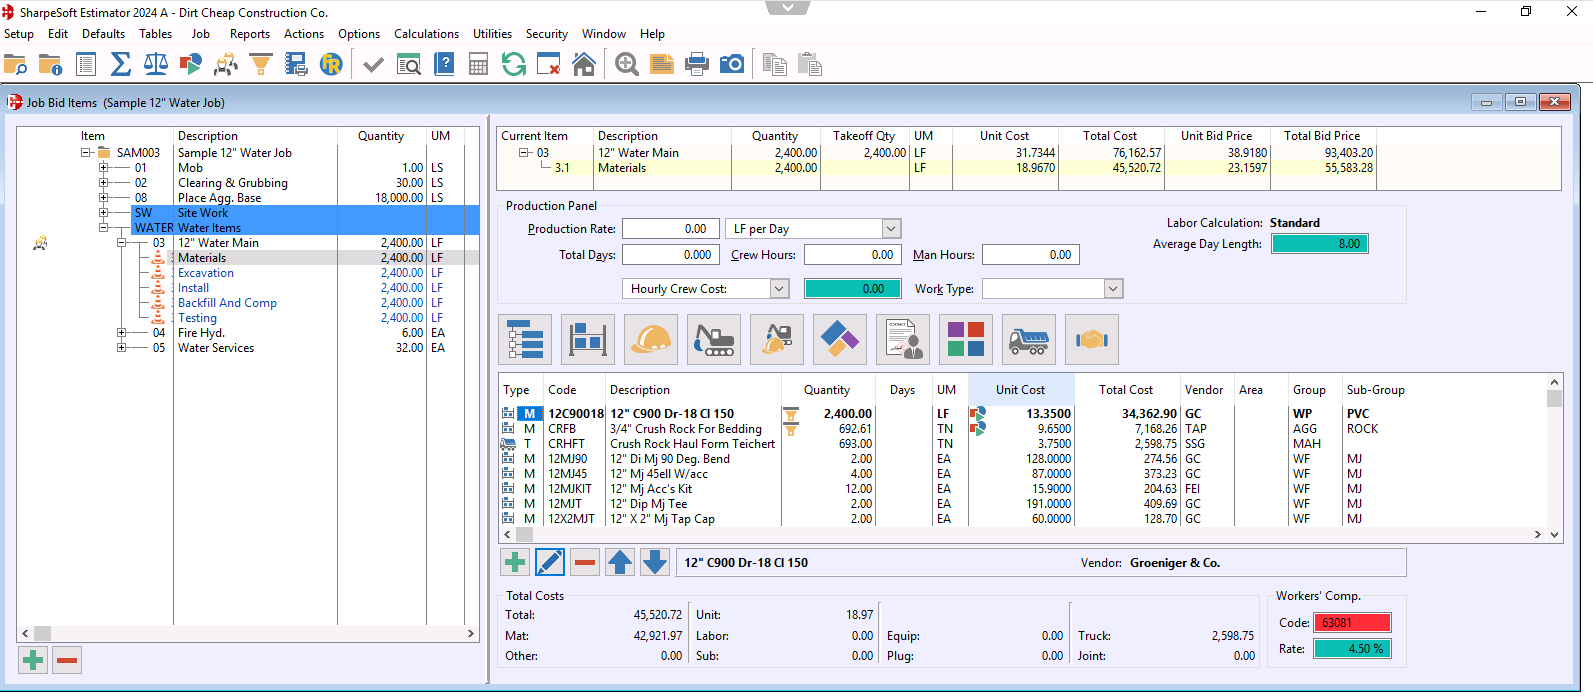 This is the SharpeSoft - Estimator item detail window. You can have unlimited sub-levels, but the details are where the cost comes from. There are icons for cost types, Material, Labor, and Equipment; you can click and quickly select or multi-select.